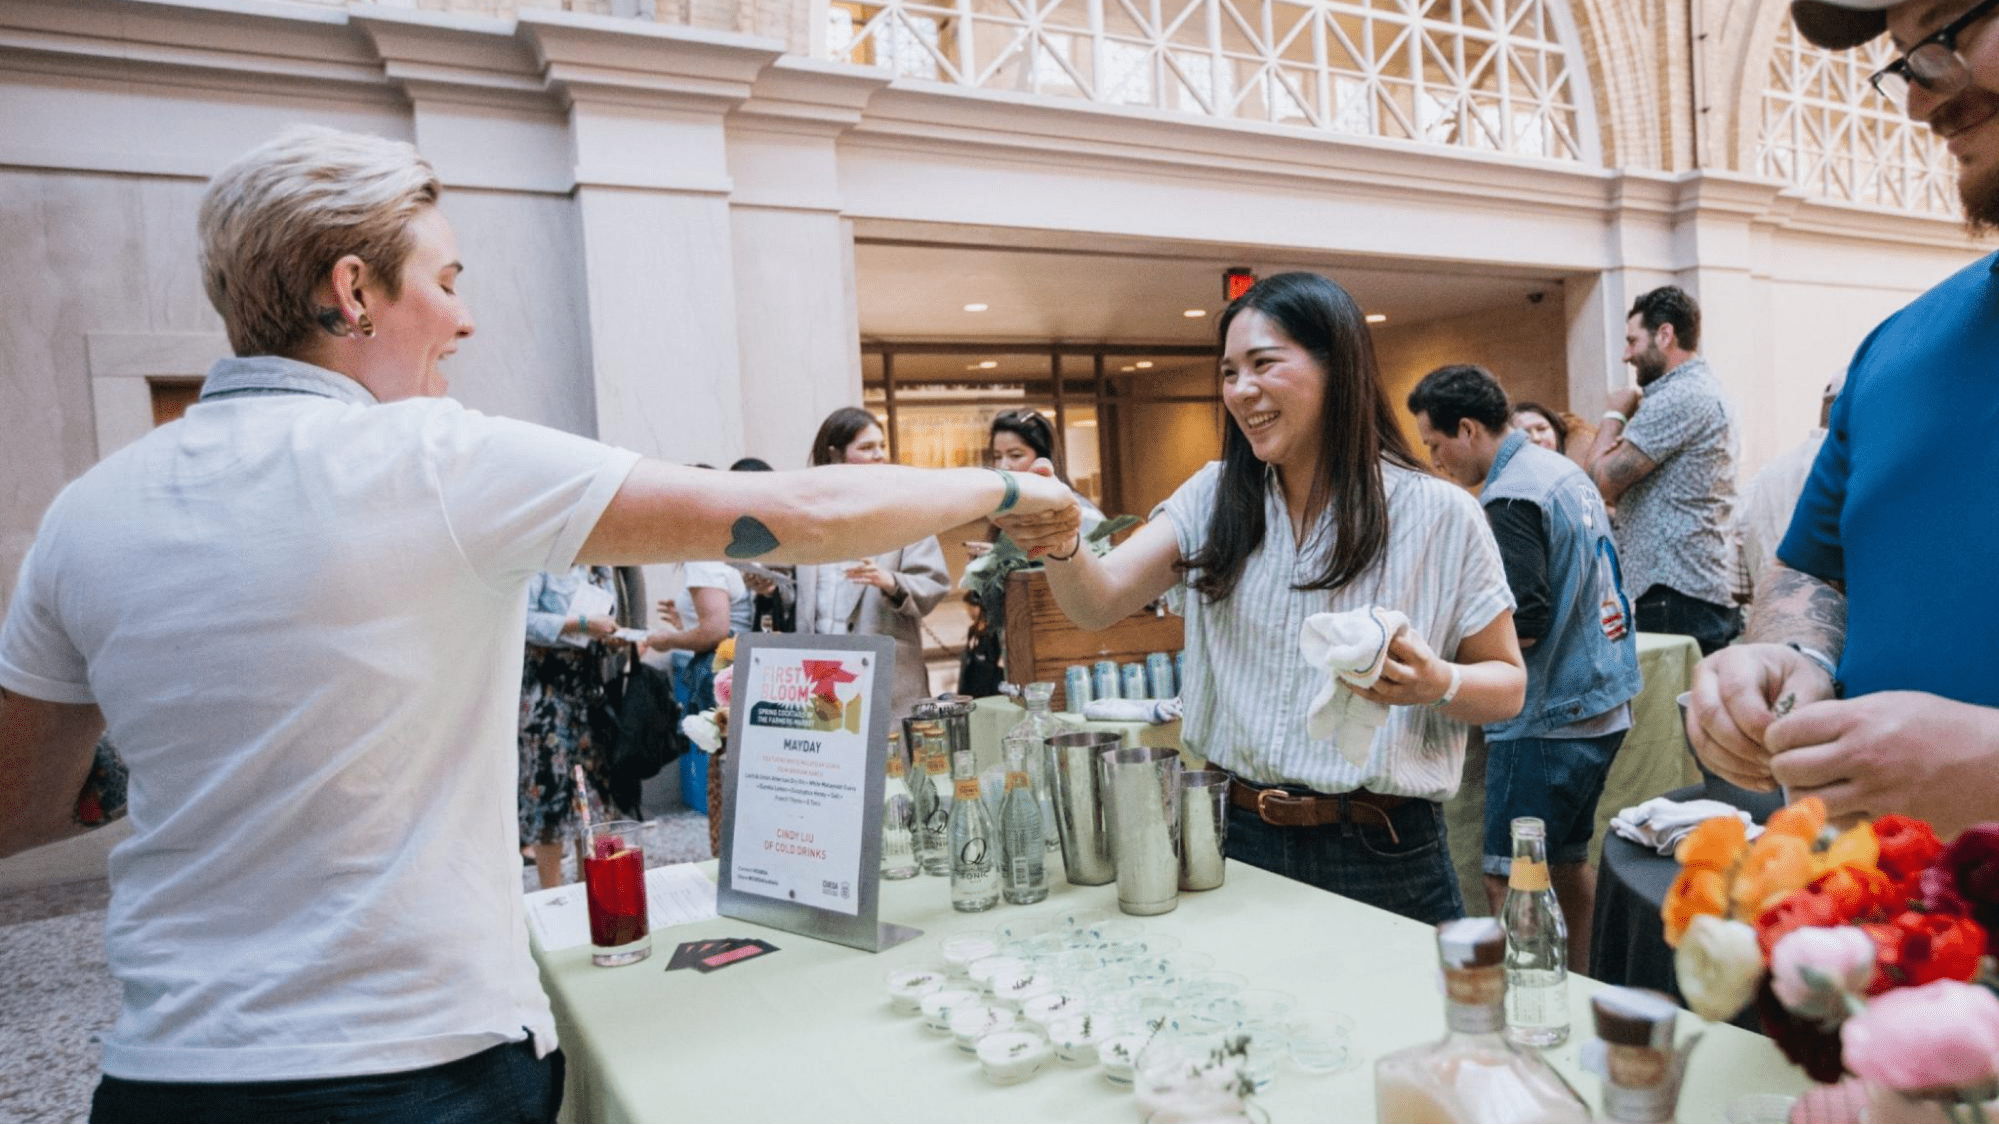 People having drinks at a themed event